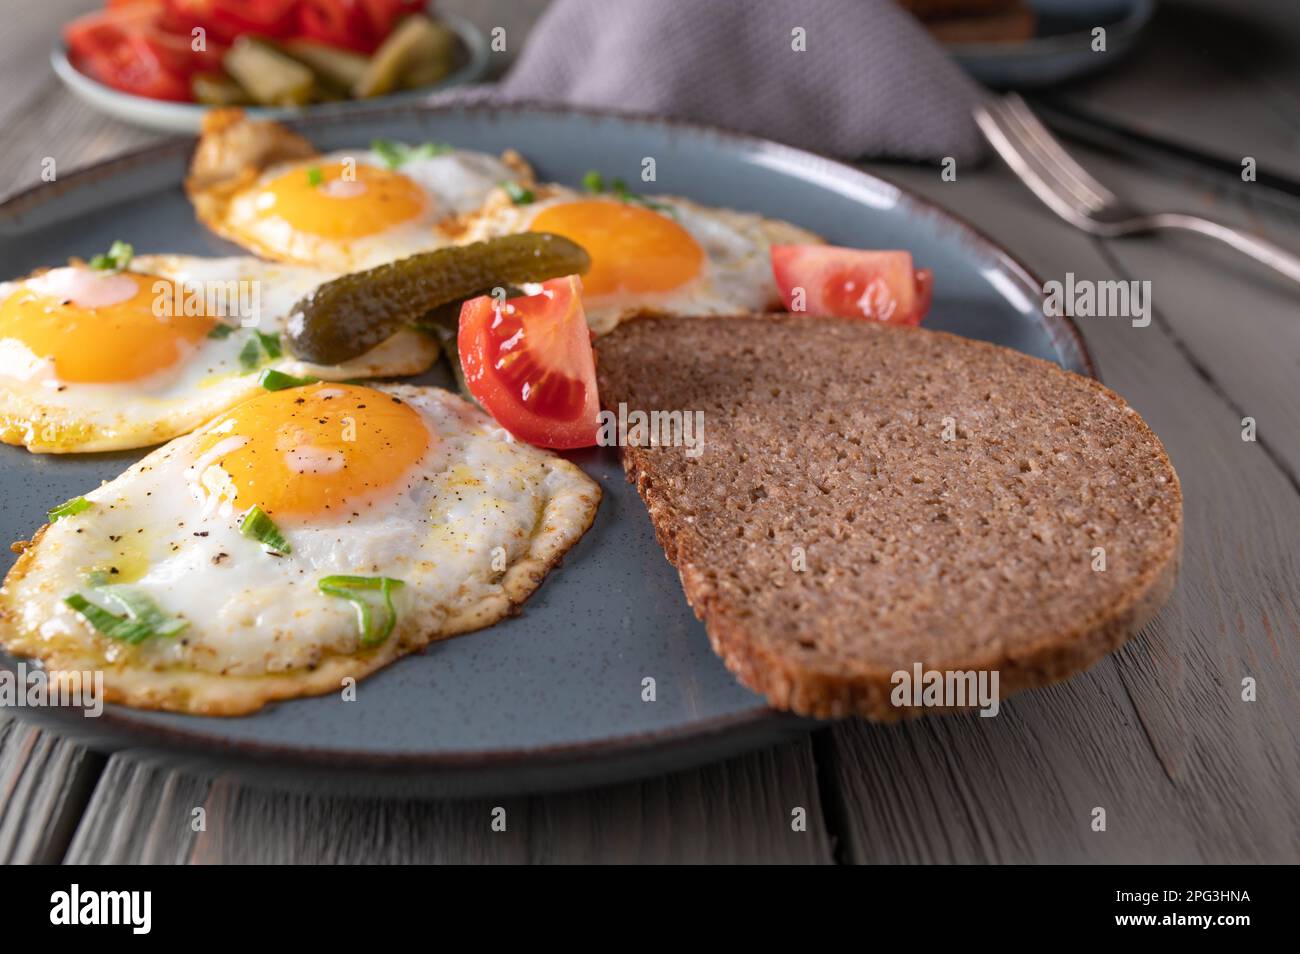 Fried eggs, sunny side up with rye bread, tomatoes and pickles. Traditional german, rustic meal Stock Photo